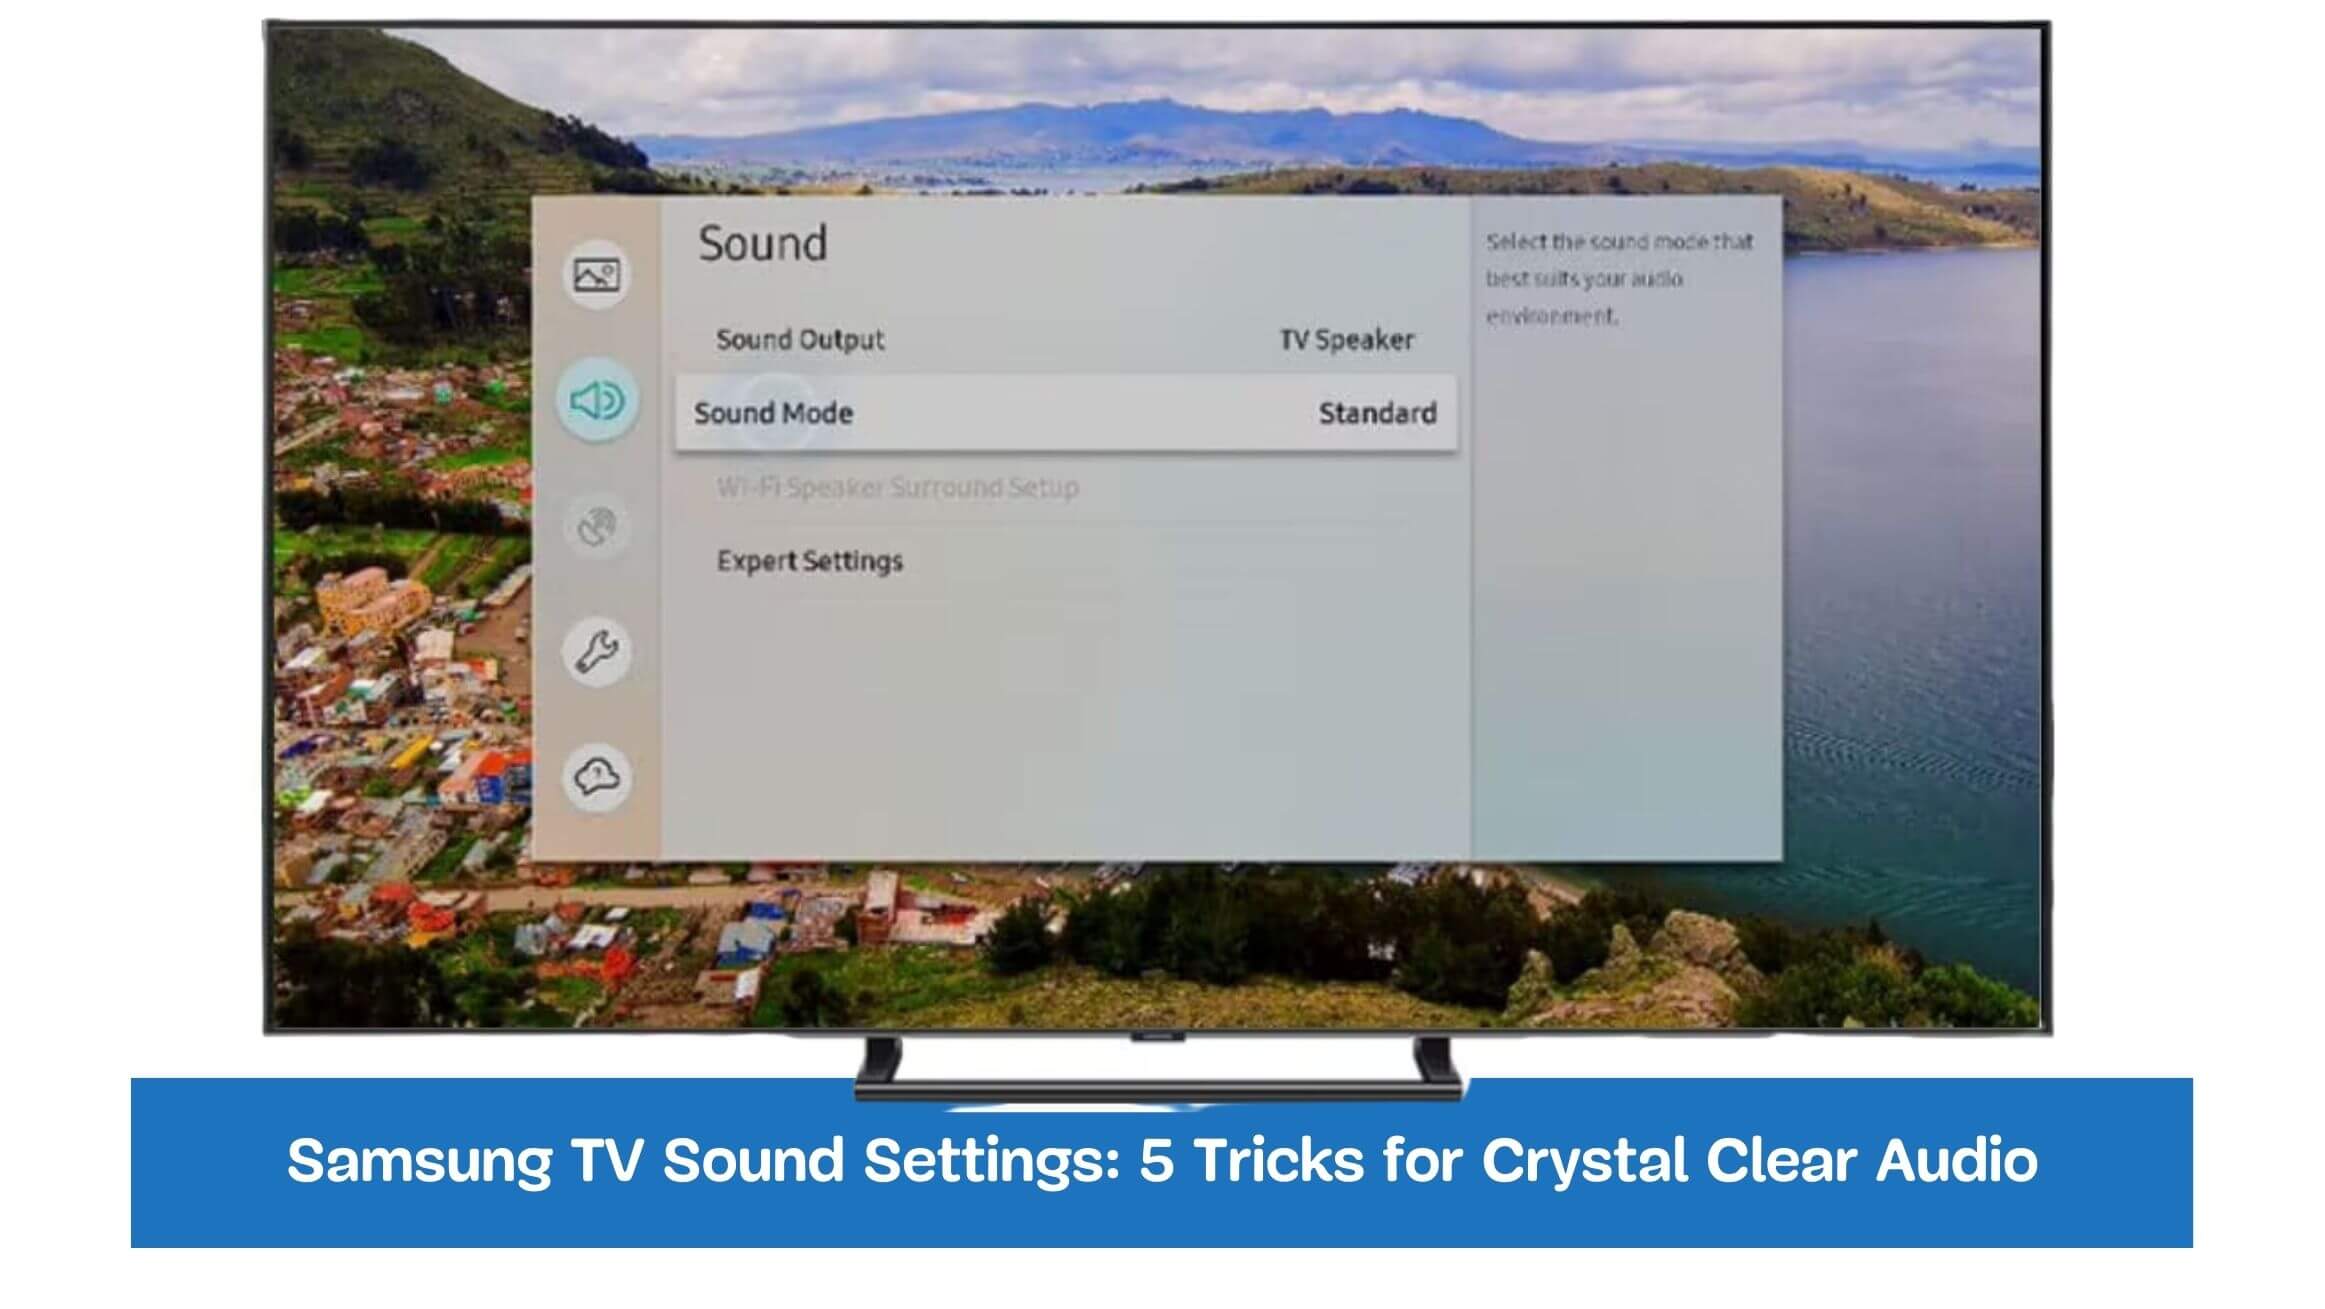 Samsung TV Sound Settings: 5 Tricks for Crystal Clear Audio